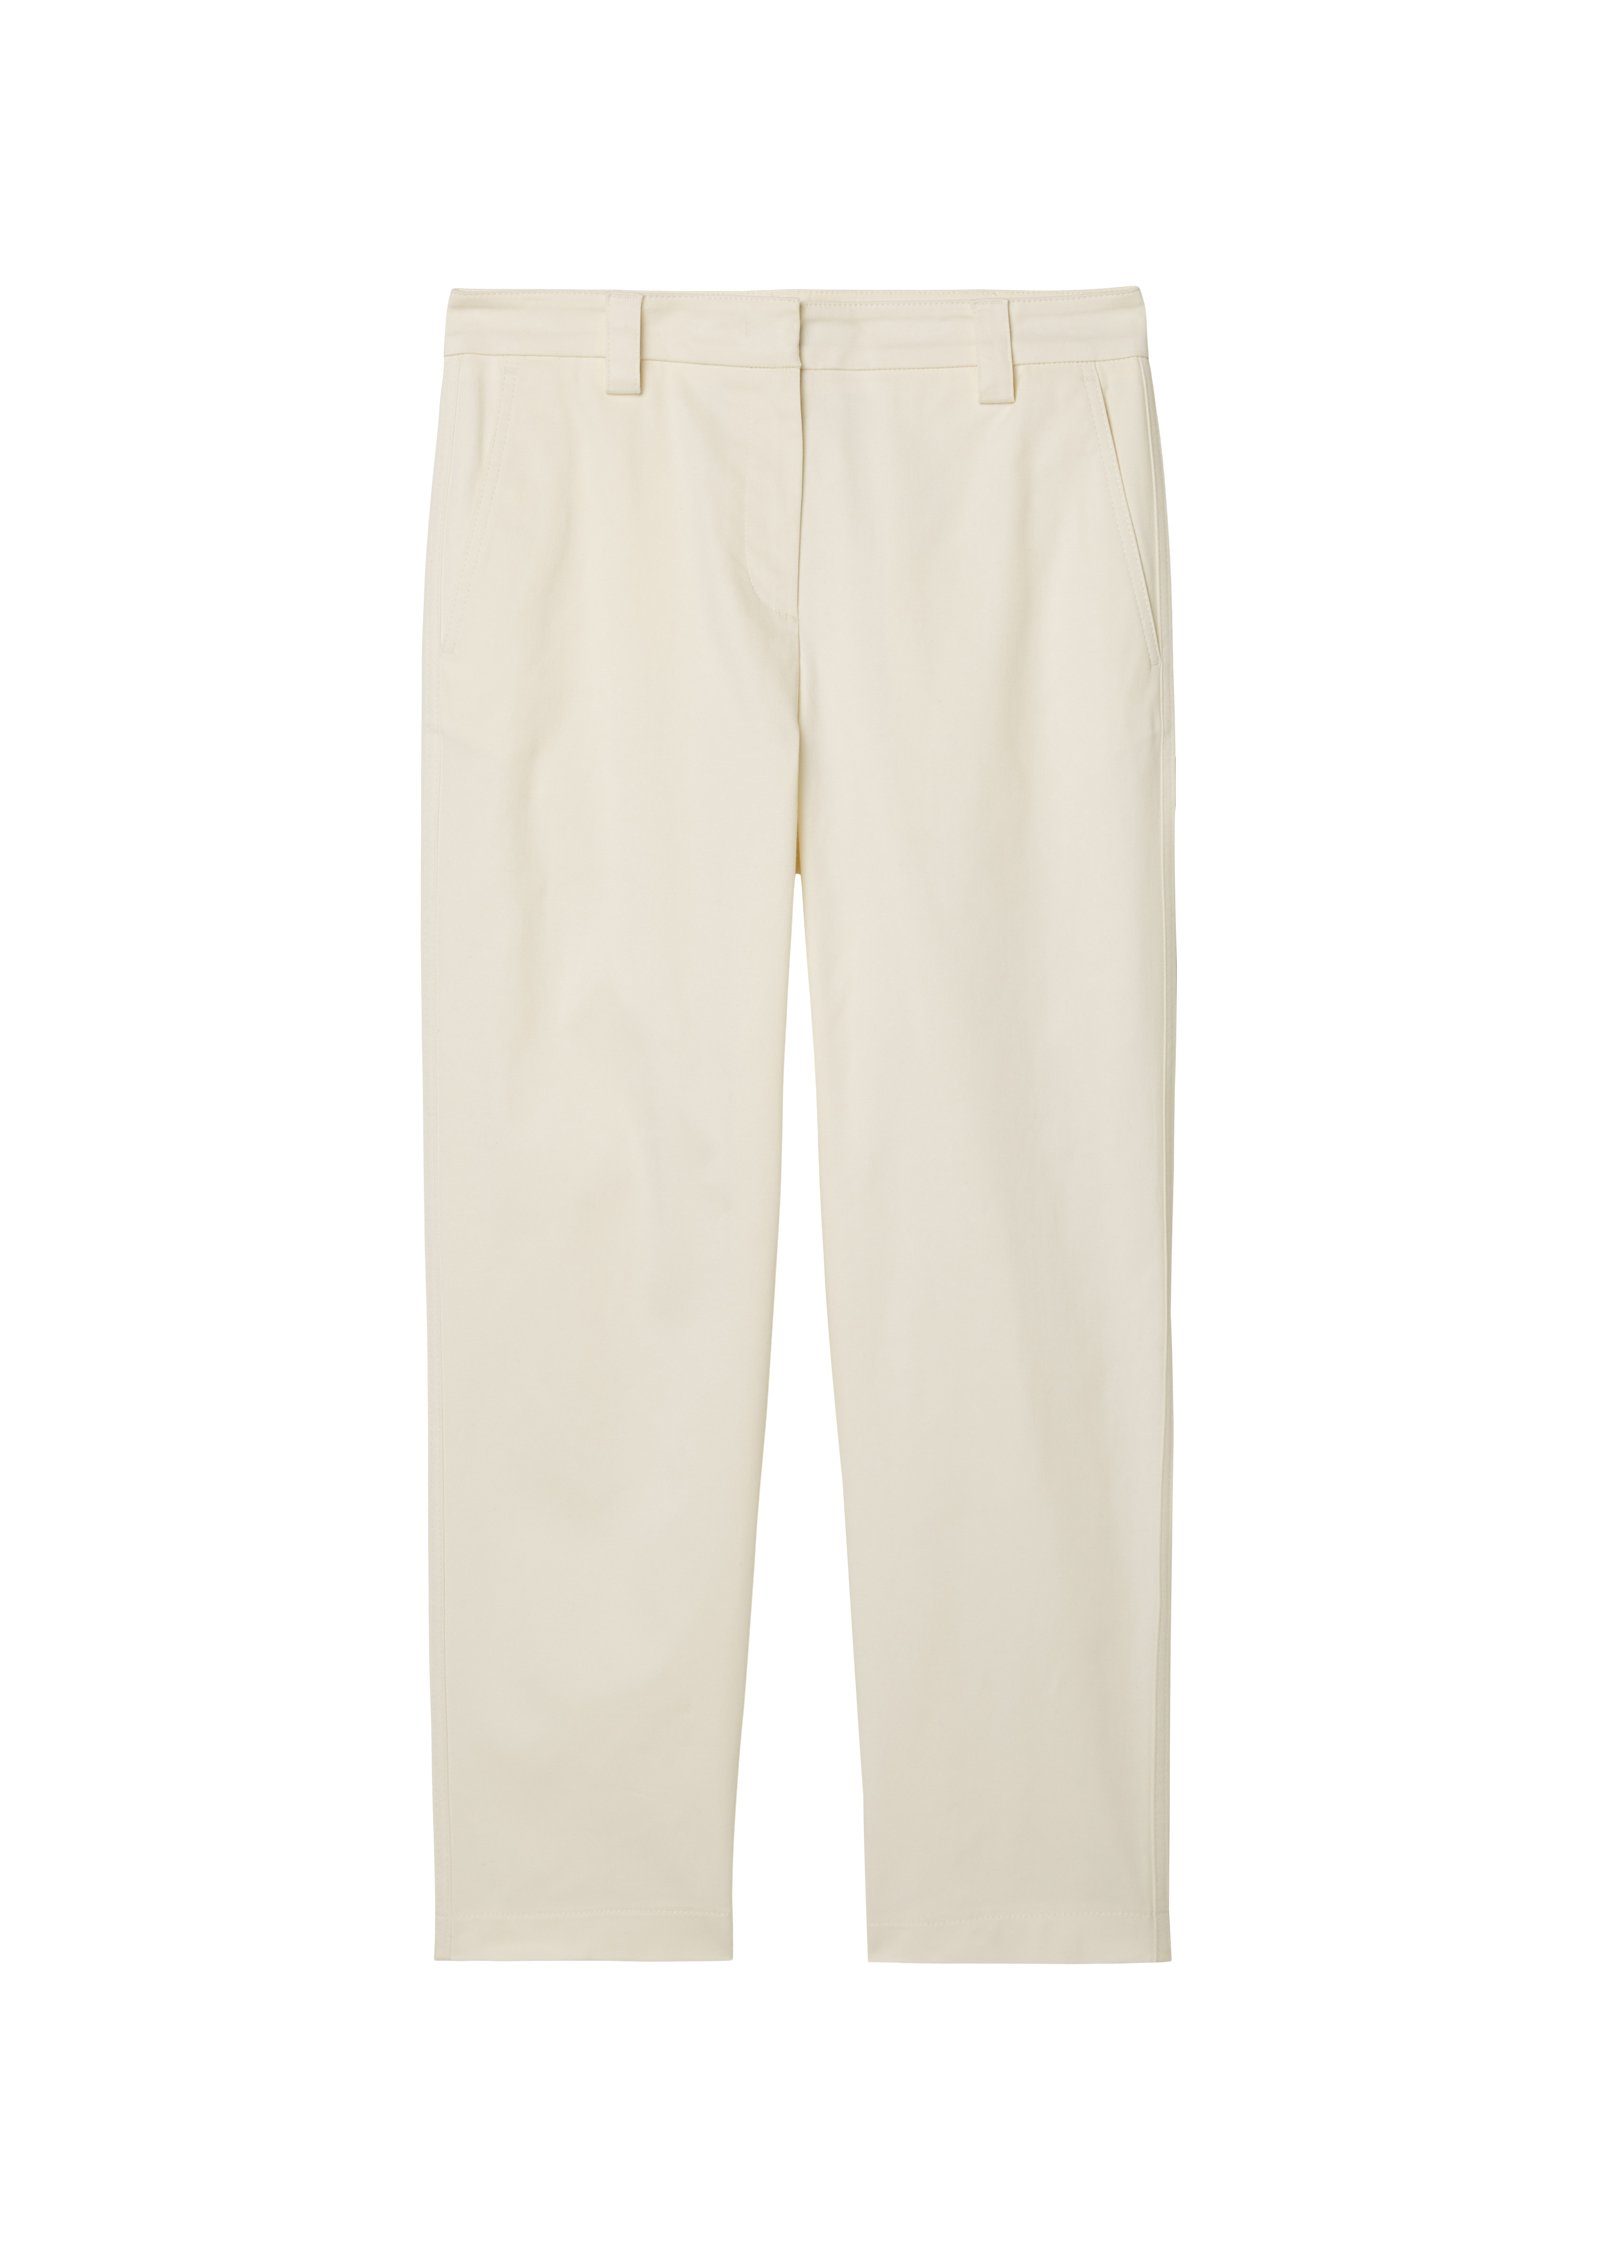 Marc O'Polo 7/8-Hose Pants, high welt modernen modern rise, Chino-Style chino pocket im leg, sand tapered chalky style